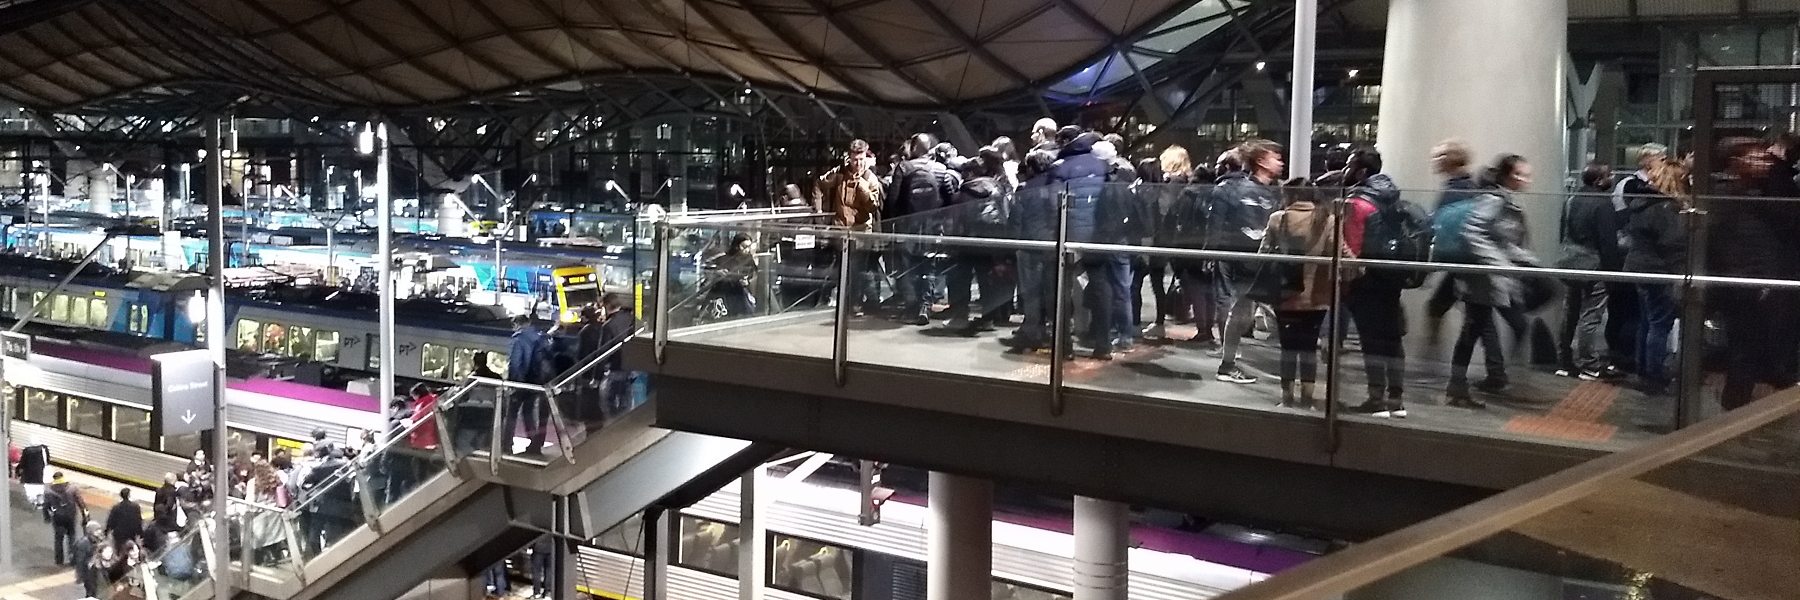 Crowding at Southern Cross Station